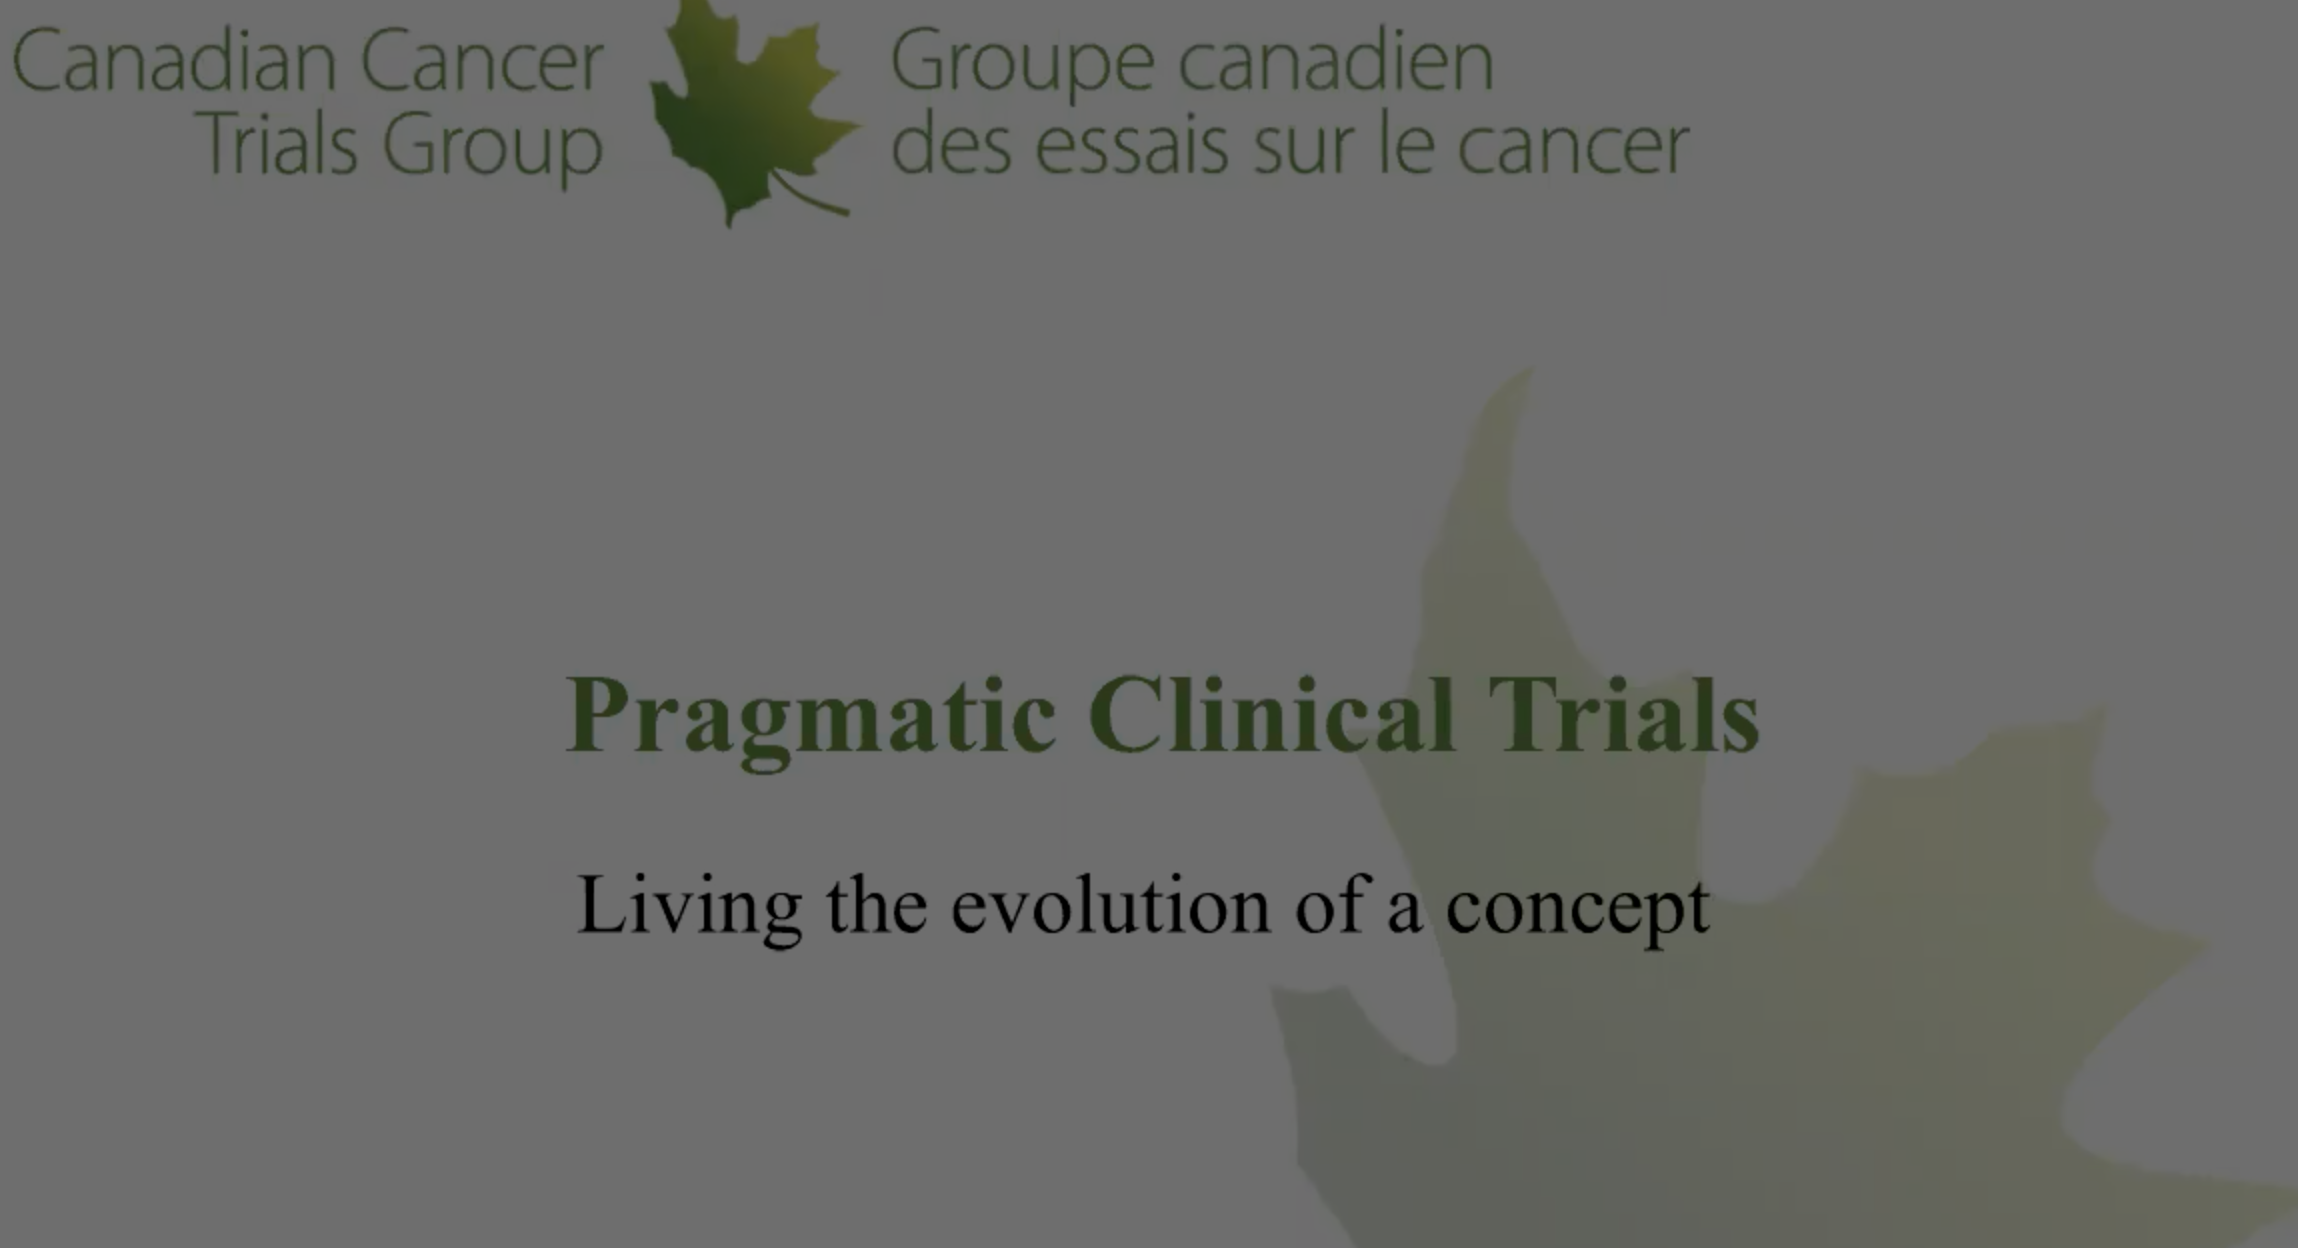 April 4th, 2022 | Pragmatic Clinical Trials – Living the evolution of a concept - Joseph L. Pater, MD, MSc, FRCP(C)